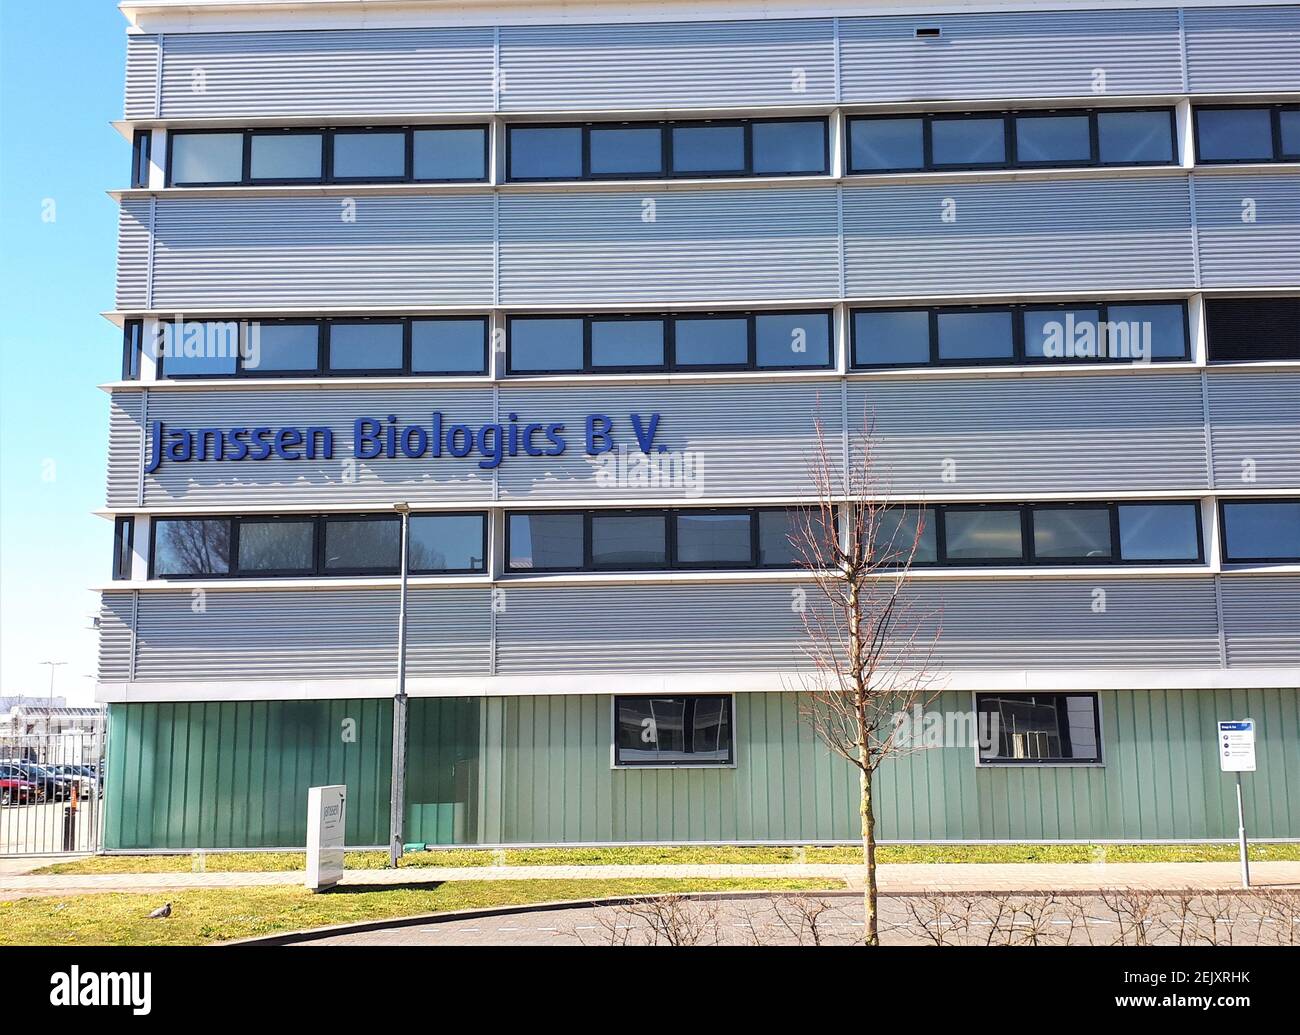 31-03-2020 Exterior of Janssen Biologics B.V. initiate. Janssen Biologics B.V. makes, acquires and markets unique biopharmaceutical drugs. To prevent a potential pandemic, Johnson & Johnson initiated a project to develop a preventive coronavirus vaccine, Covid-19, to potentially protect people from the disease. In doing so, they build on their leadership position in the development of monoclonal antibodies. Antibodies are substances that the body produces in response to bacteria, viruses or other foreign substances. Janssen Biologics' innovative products focus on three main disease categories Stock Photo